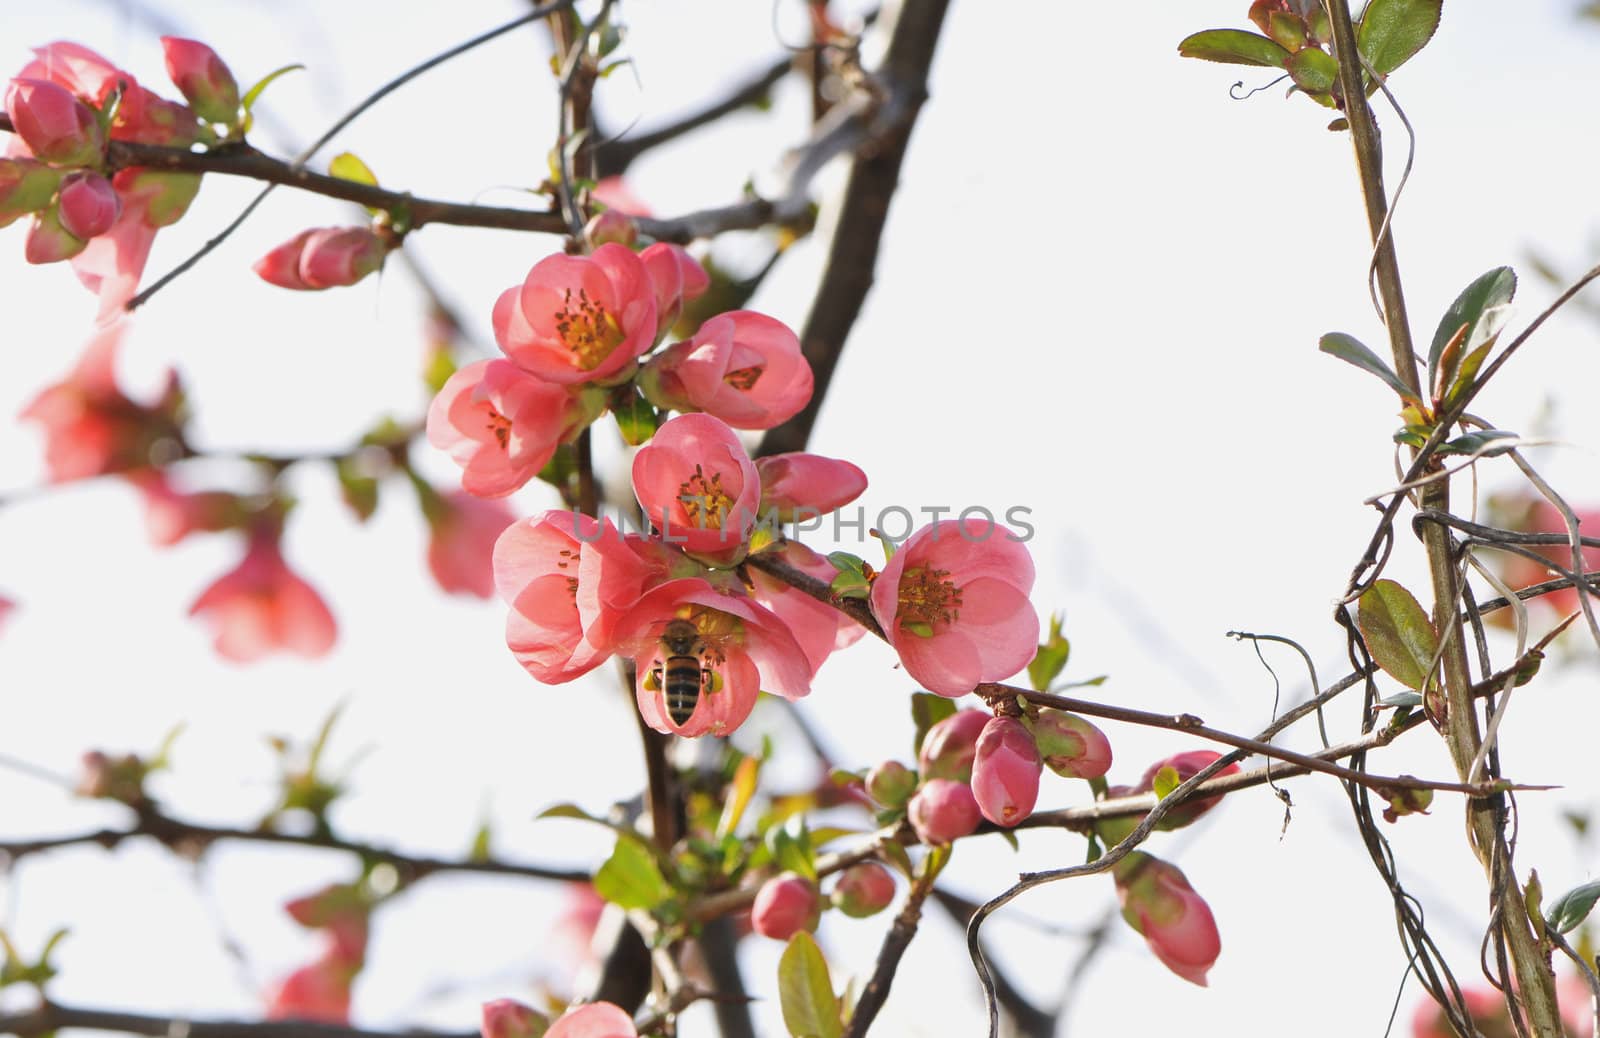 Some pink flowers of a tree with a bee inside one and a white sky